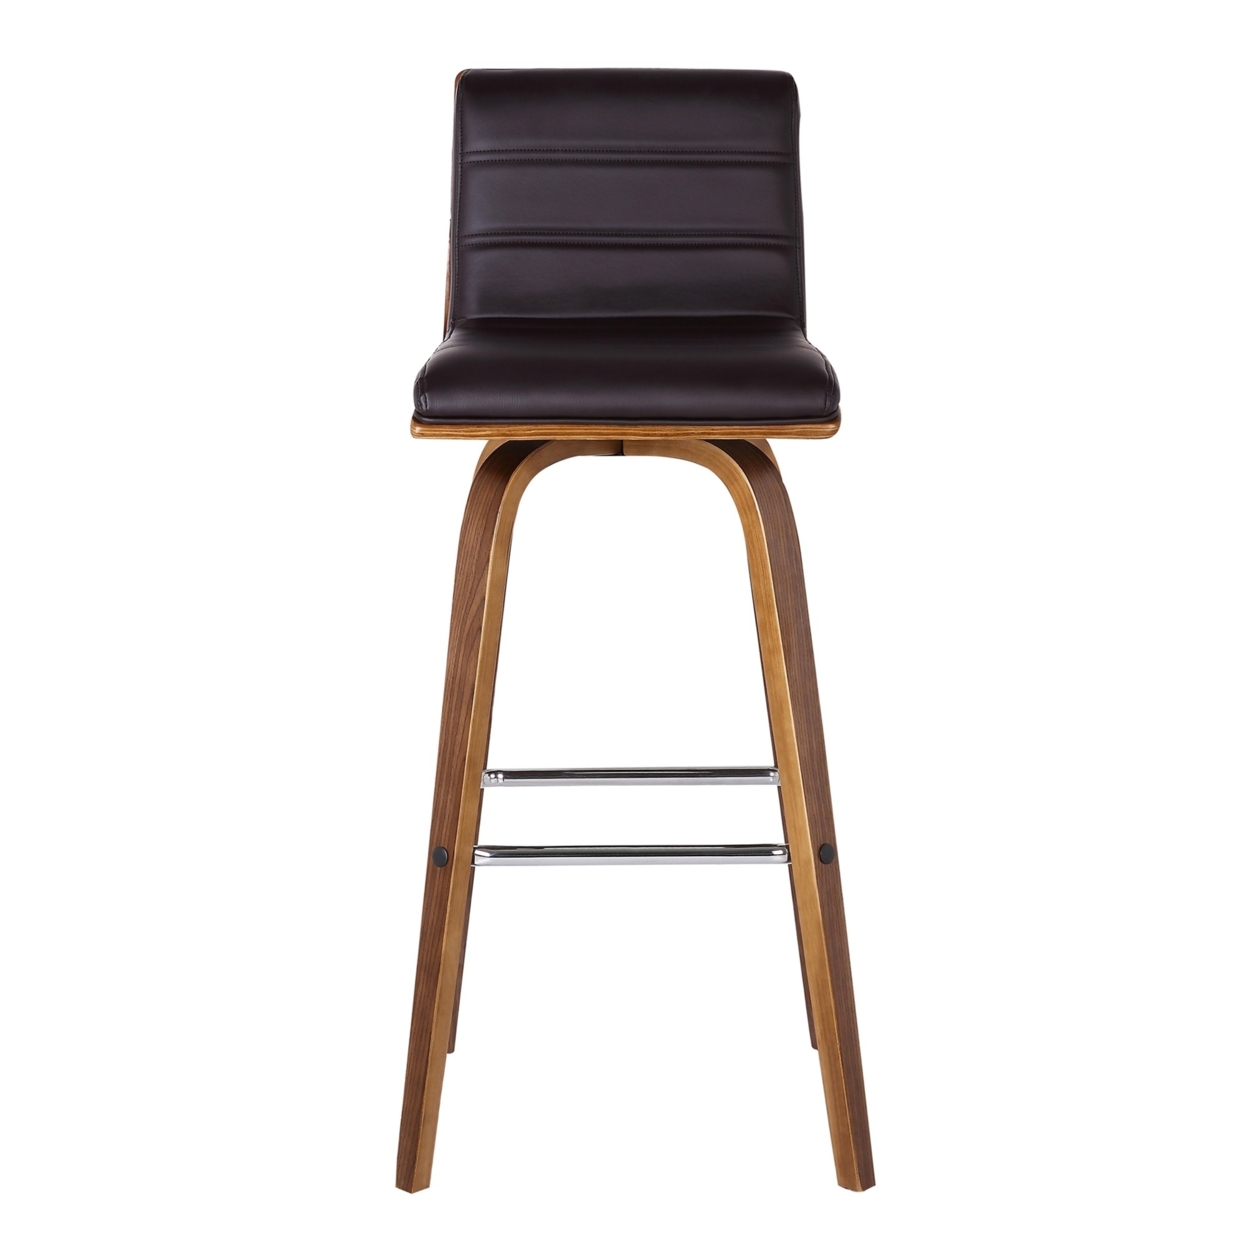 30 Inch Faux Leather Counter Height Barstool With Wooden Support, Brown- Saltoro Sherpi